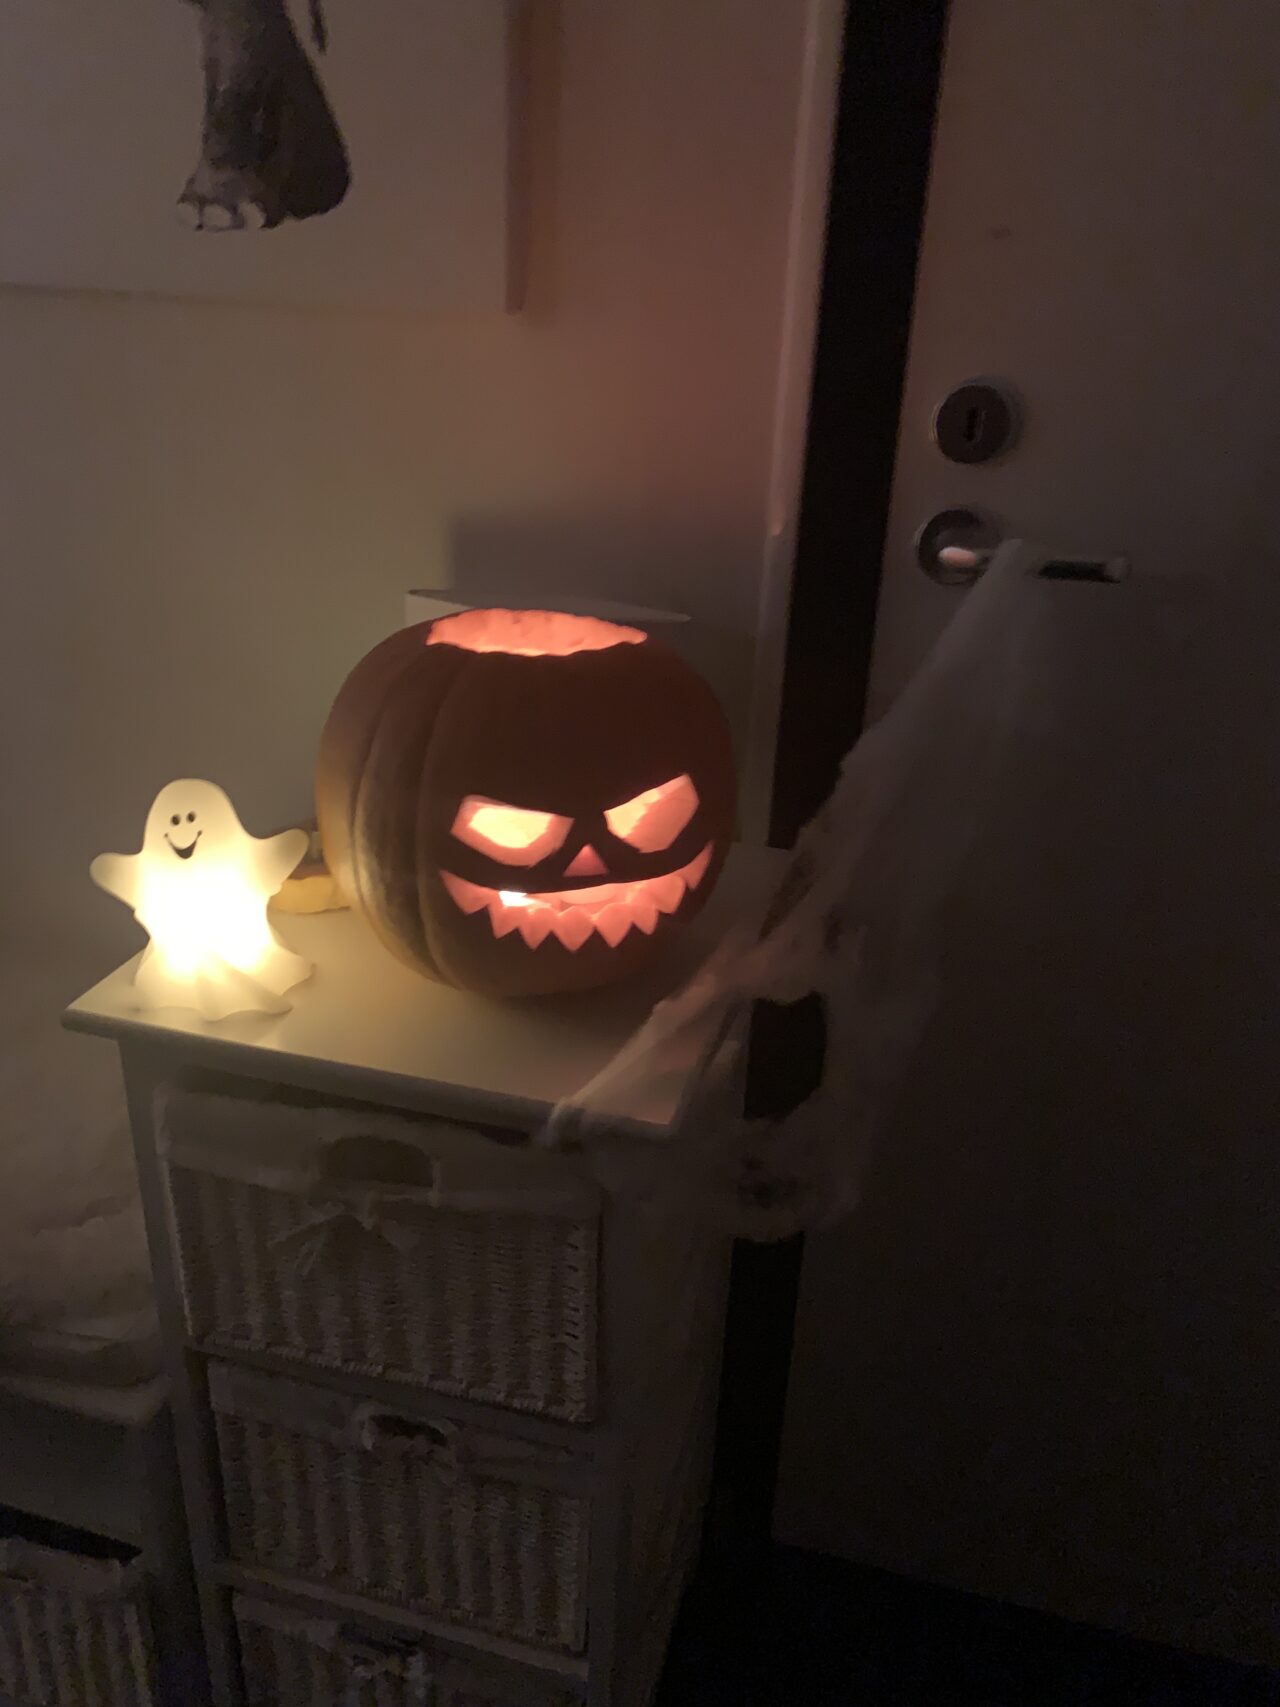 Carved Halloween Pumpkin With Candles And A Ghost